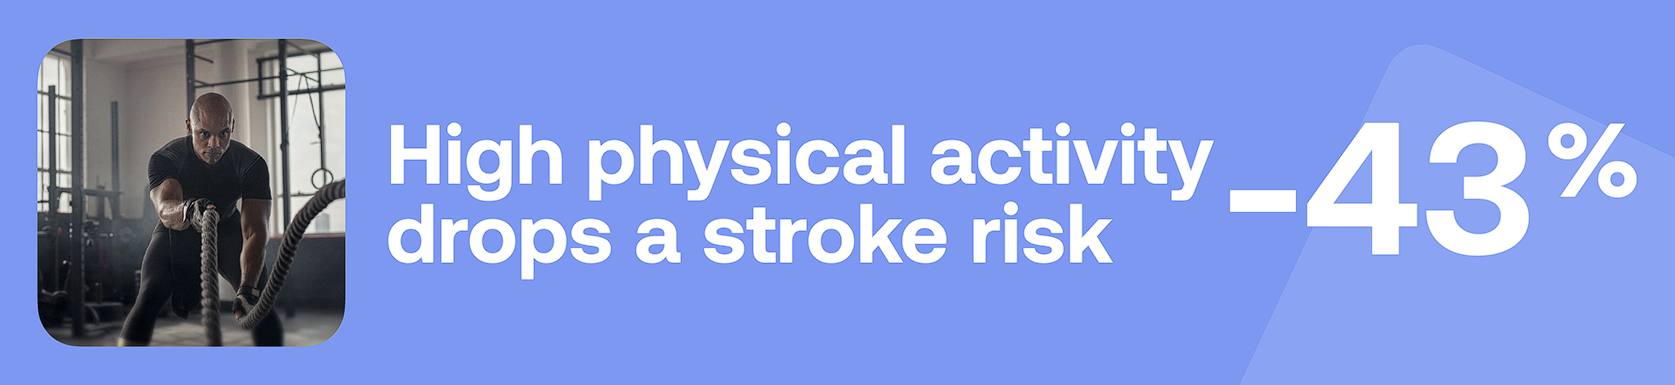 High physical activity drops a stroke risk -43%